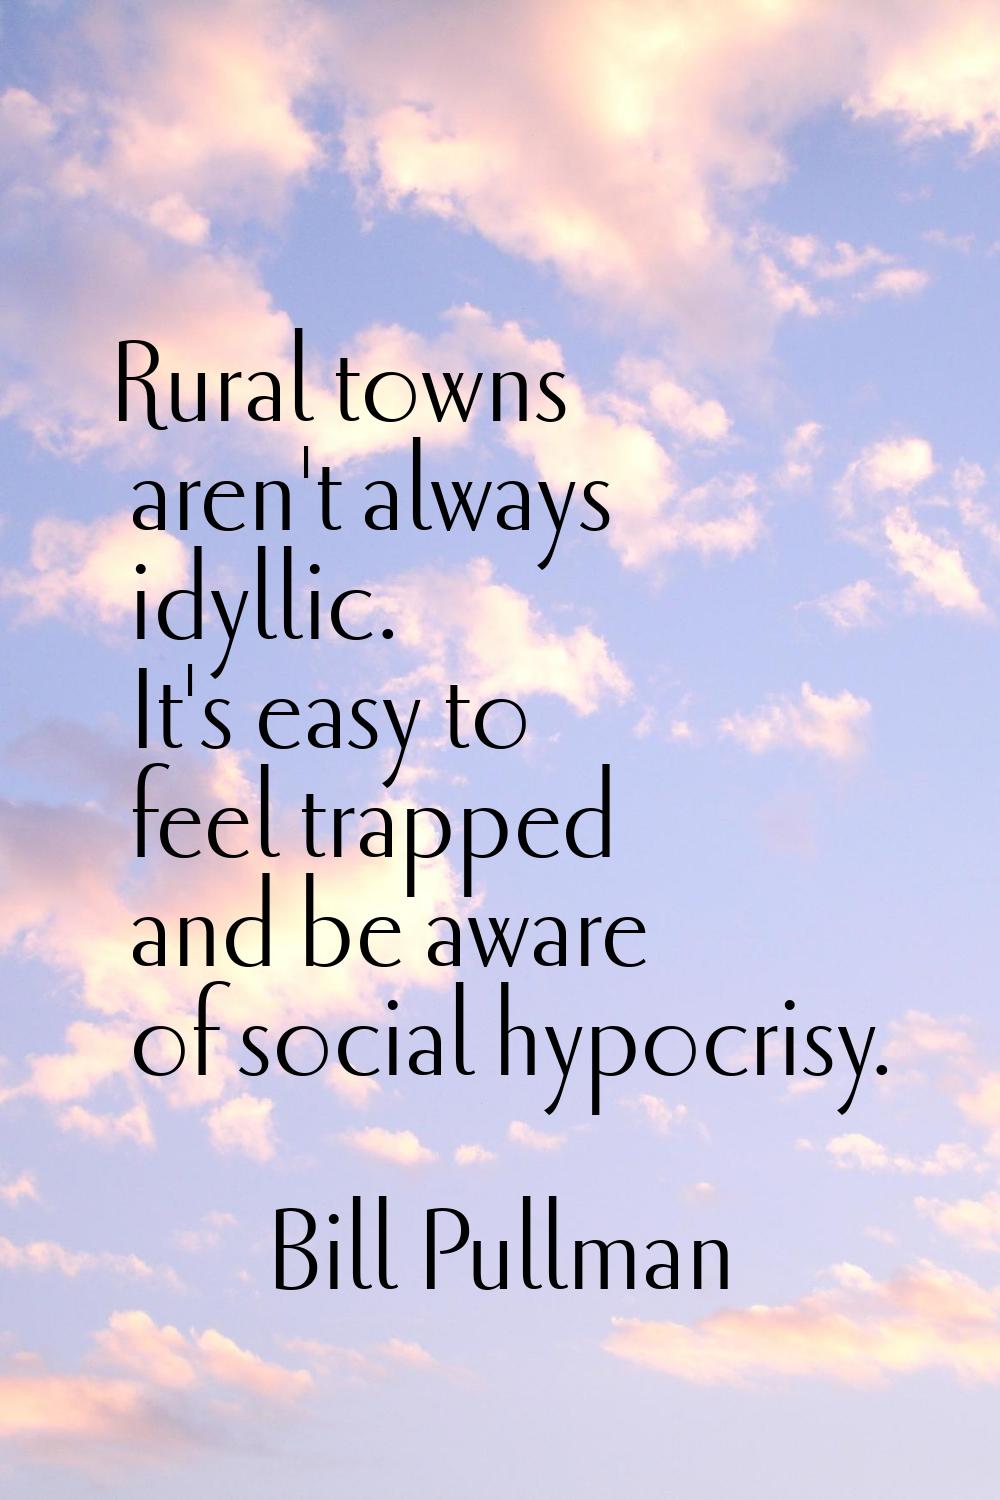 Rural towns aren't always idyllic. It's easy to feel trapped and be aware of social hypocrisy.